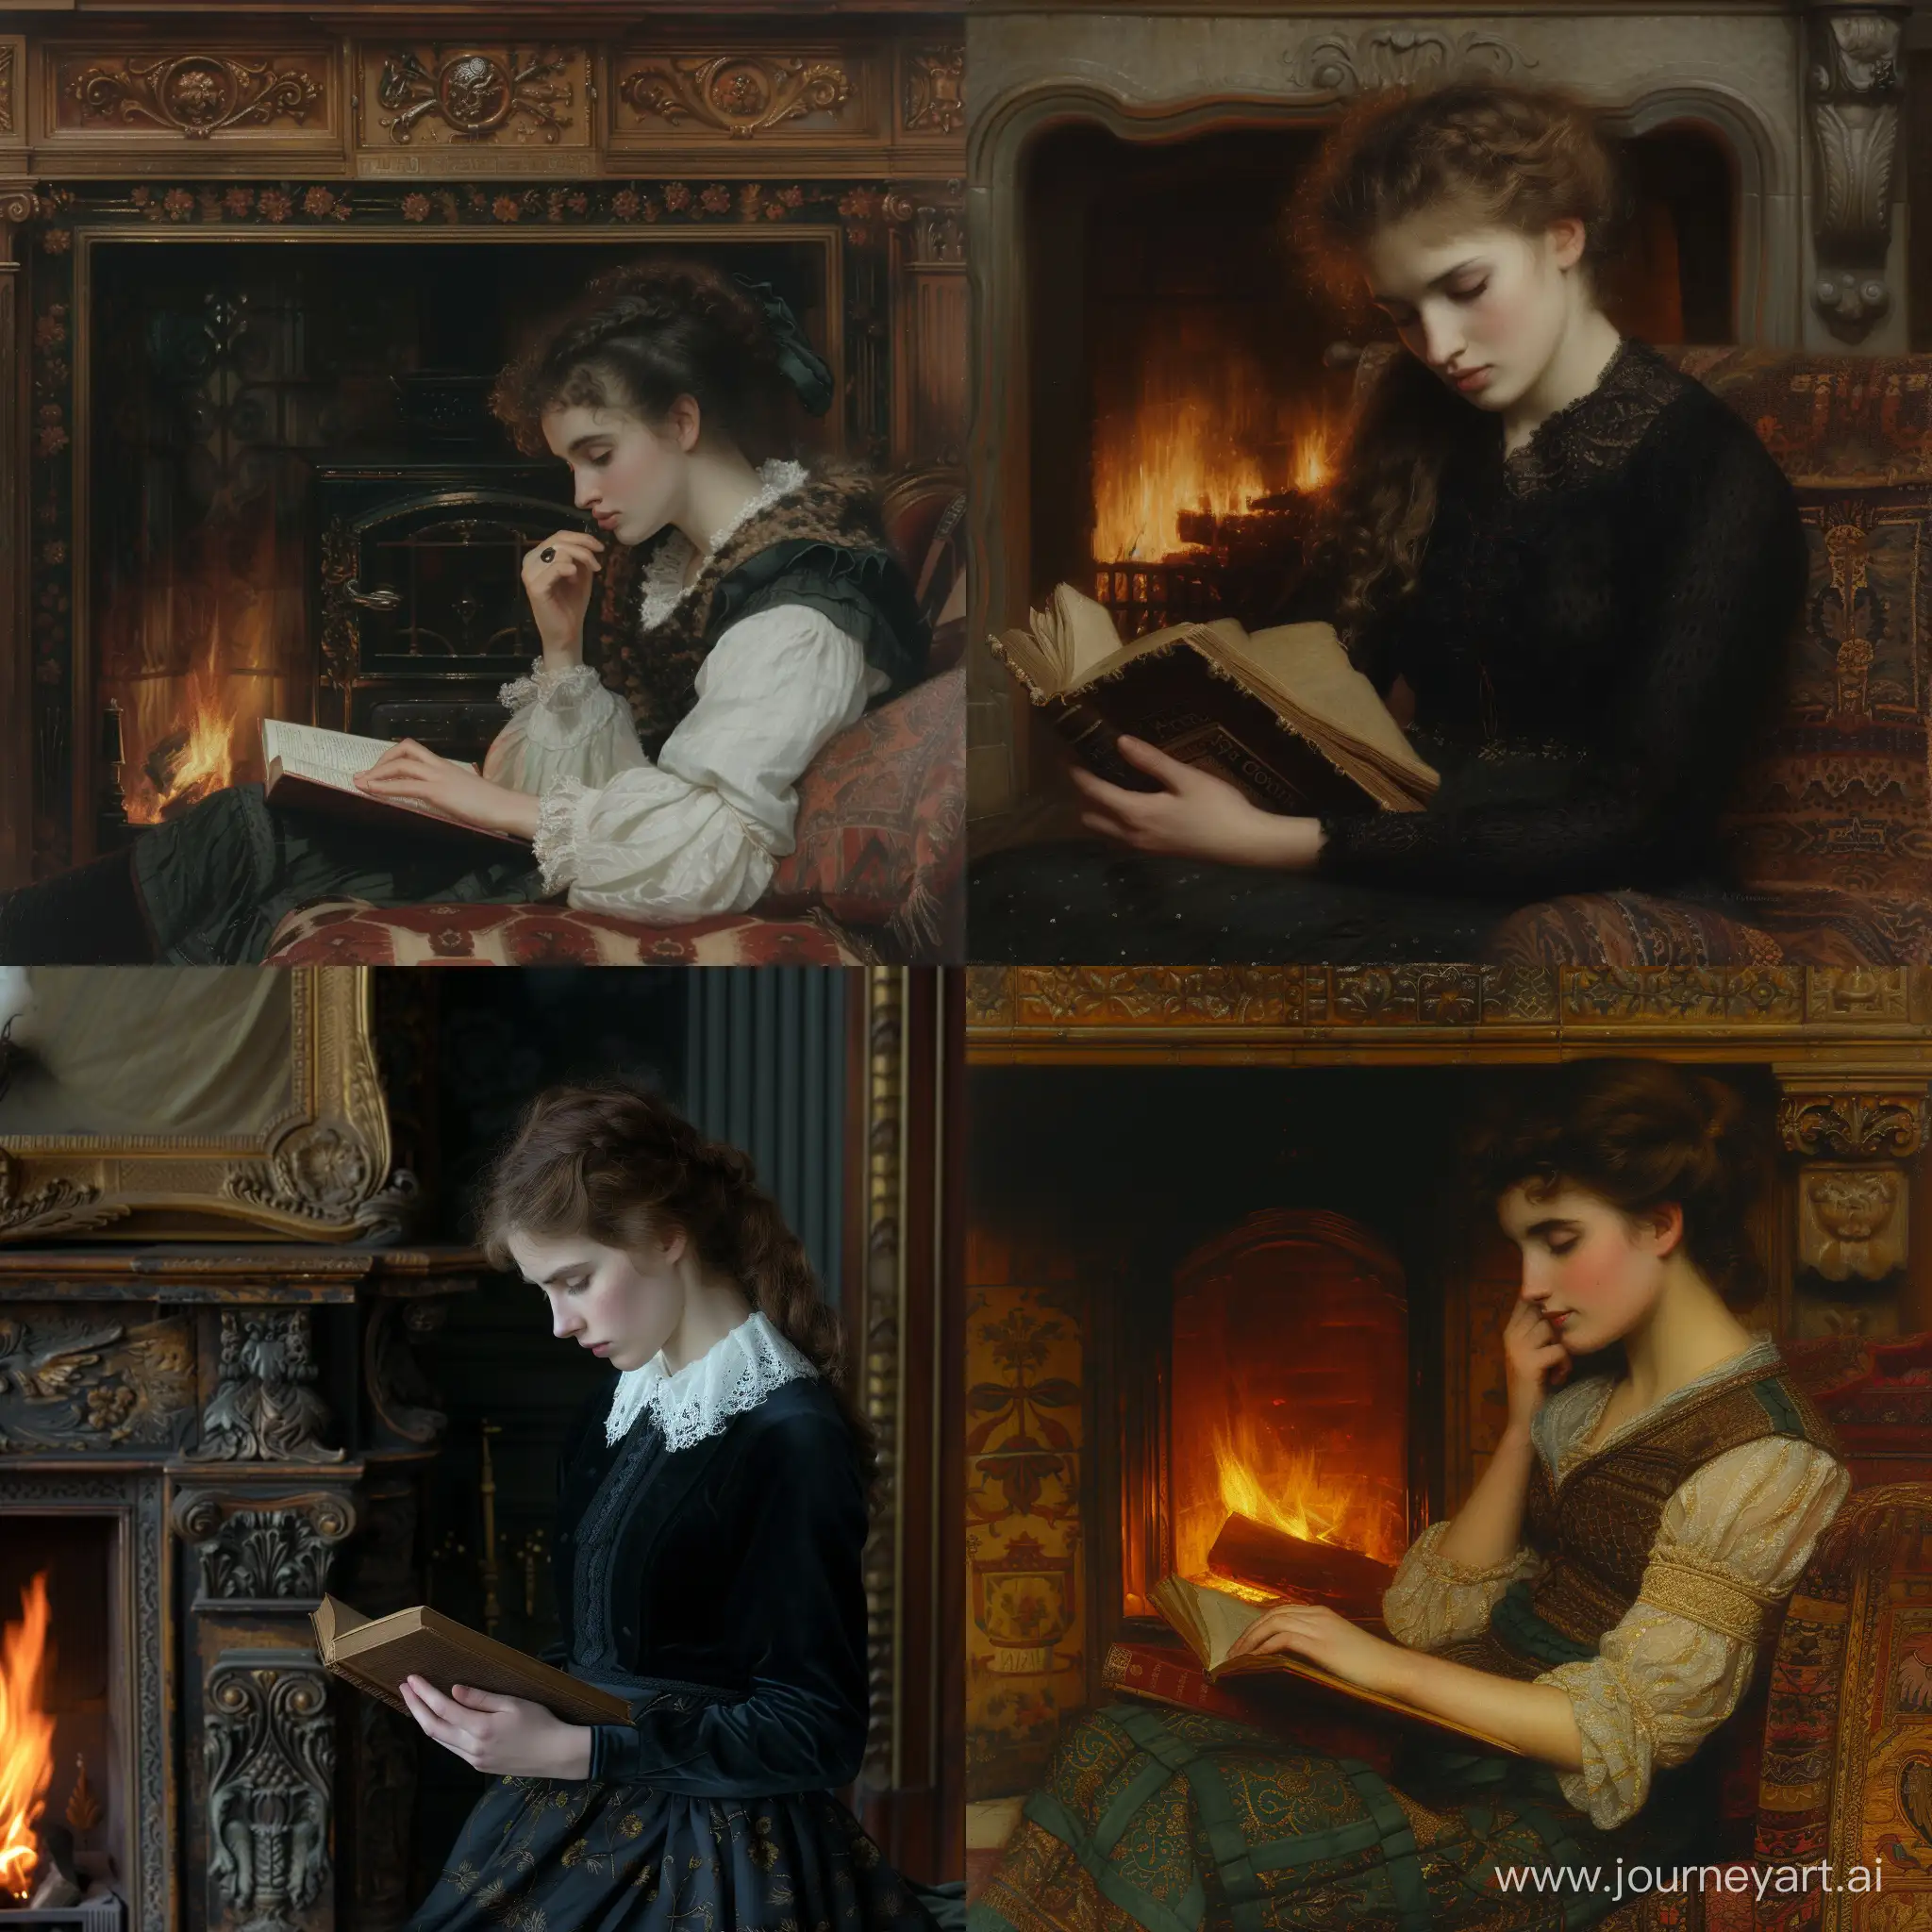 a young irish sad woman reflecting by a fireplace in the 19th century reading a book.